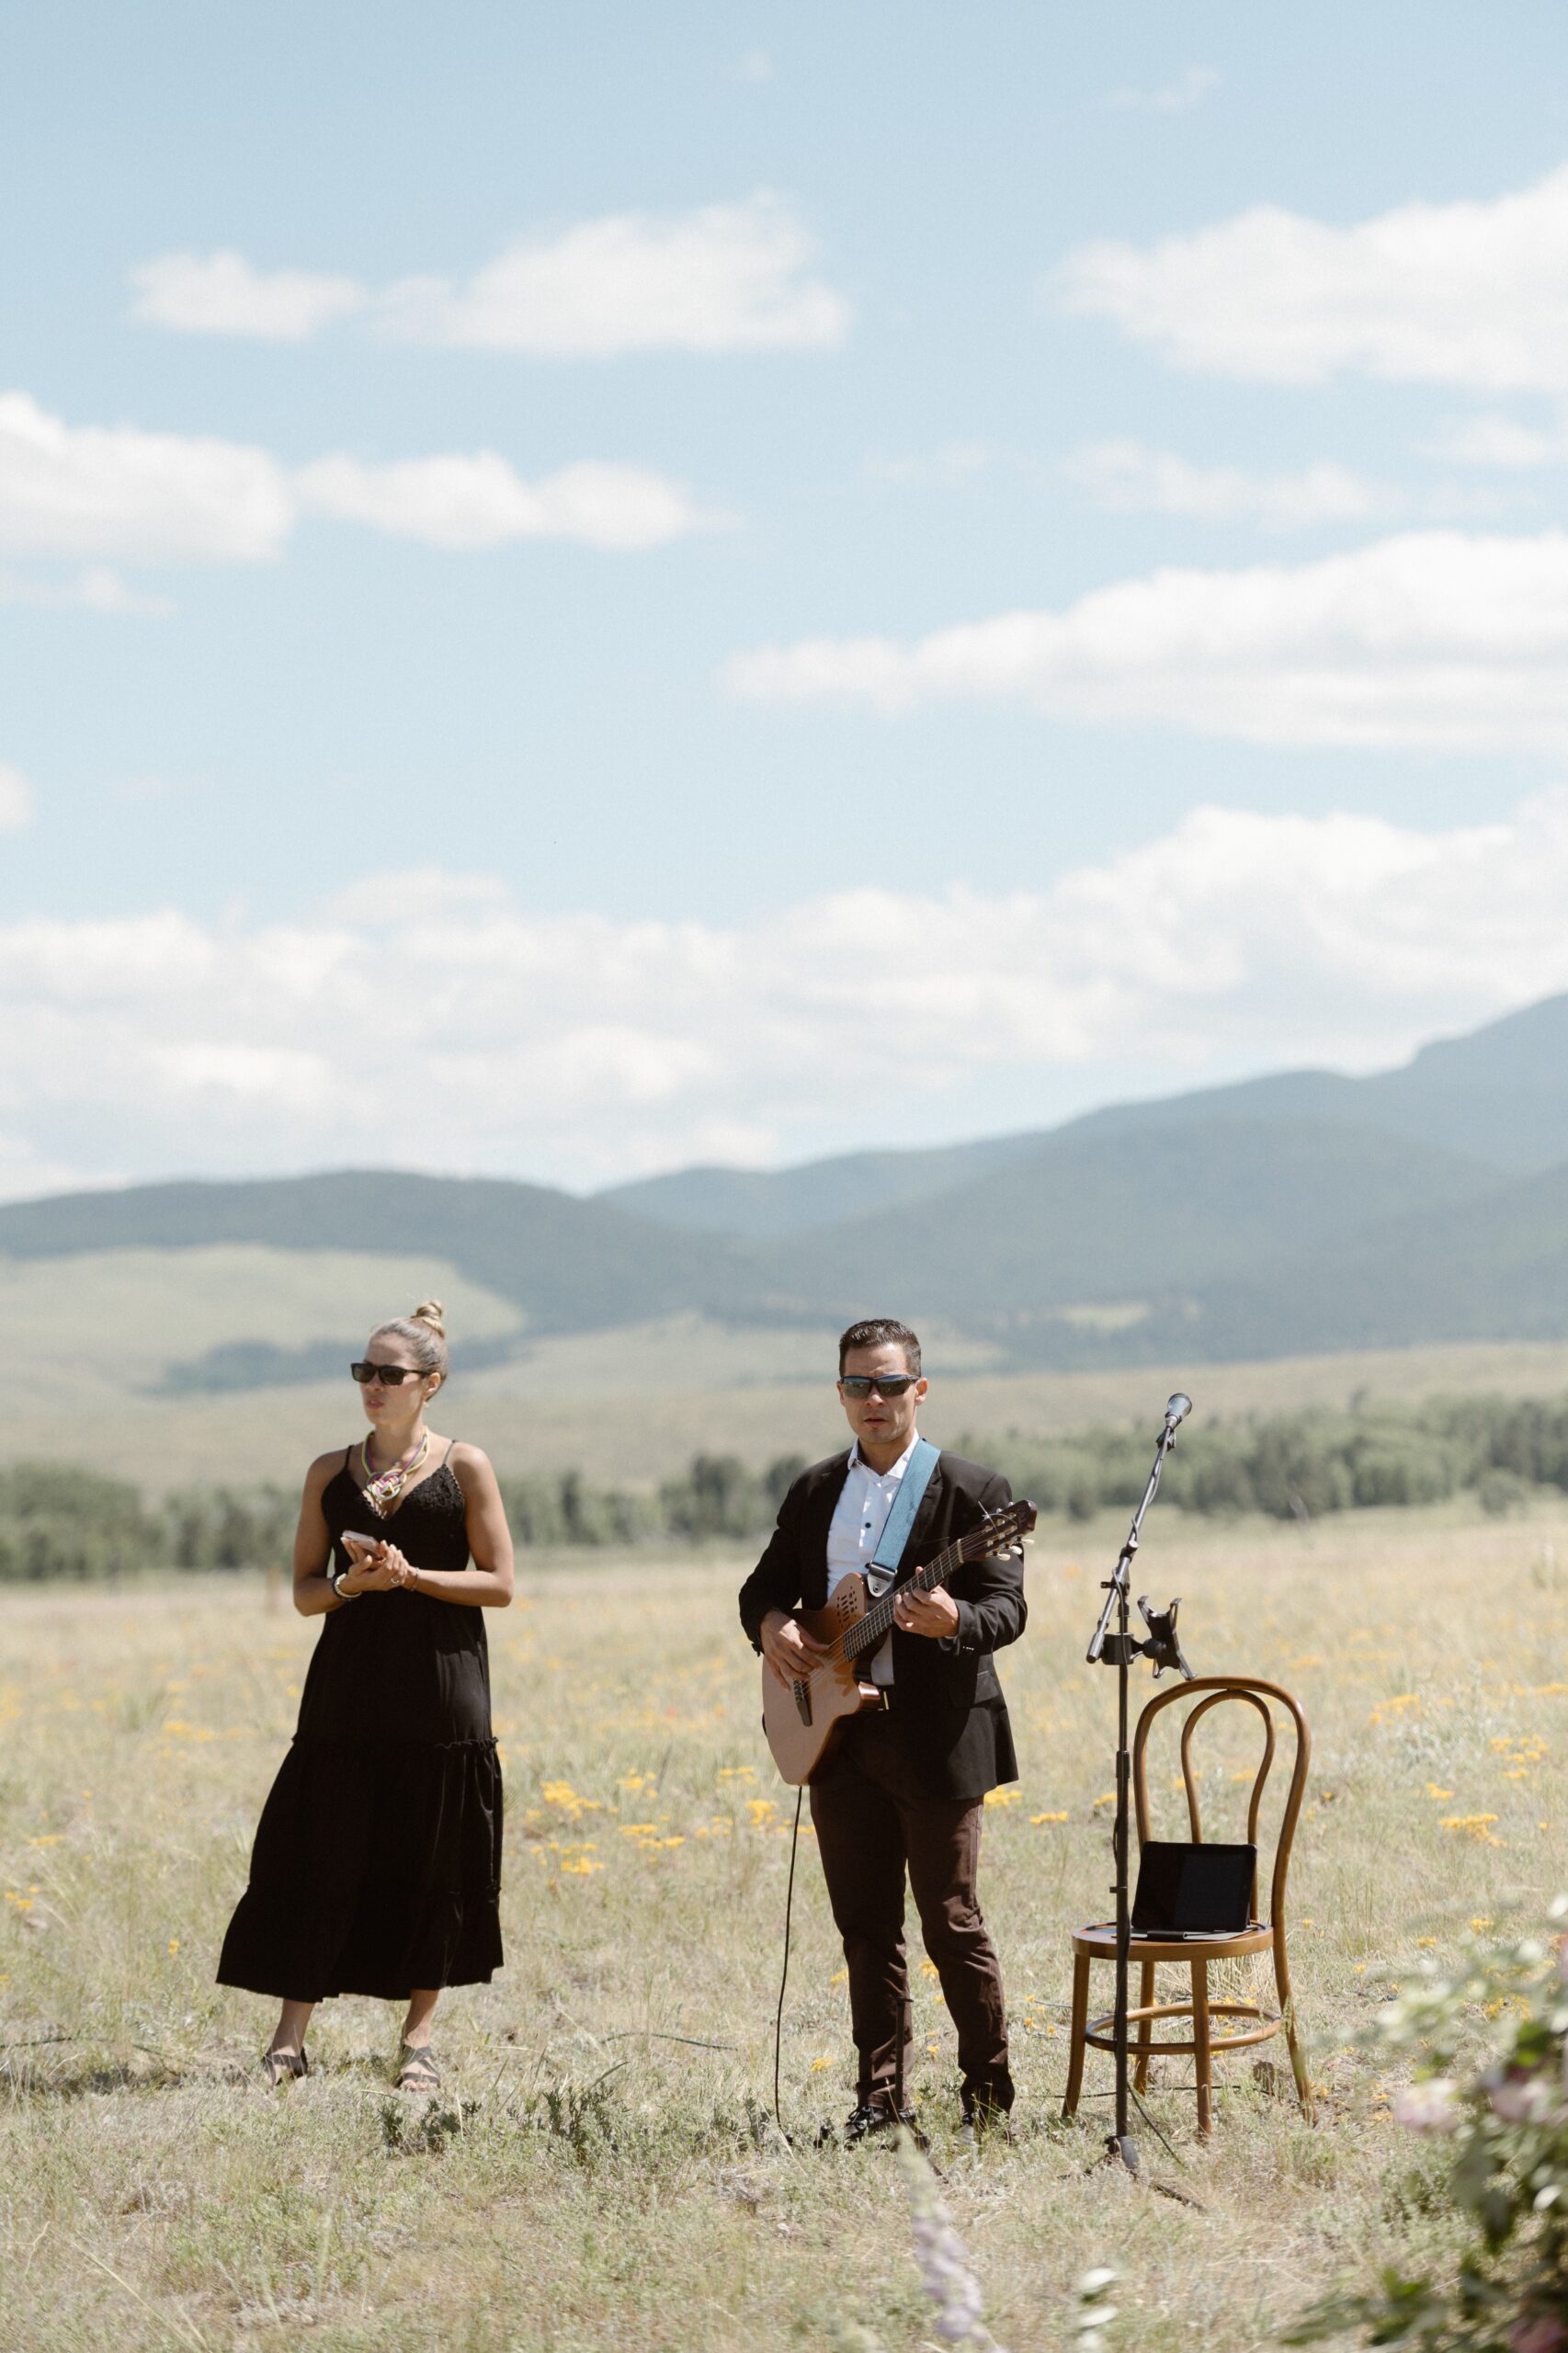 Two musicians stand in a grassy field with mountains in the background. Photo by Colorado wedding photographer Ashley Joyce.